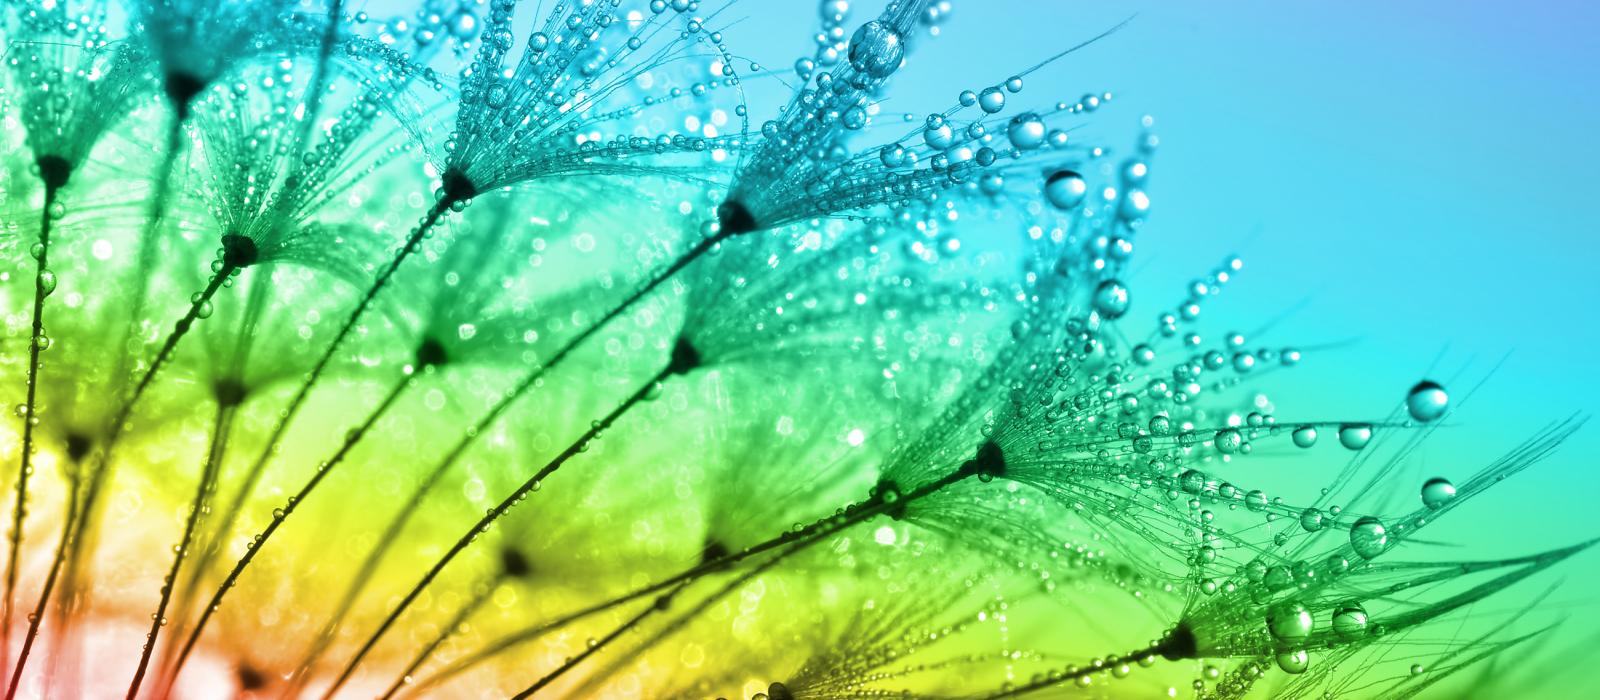 dandelion with water droplets against rainbow background